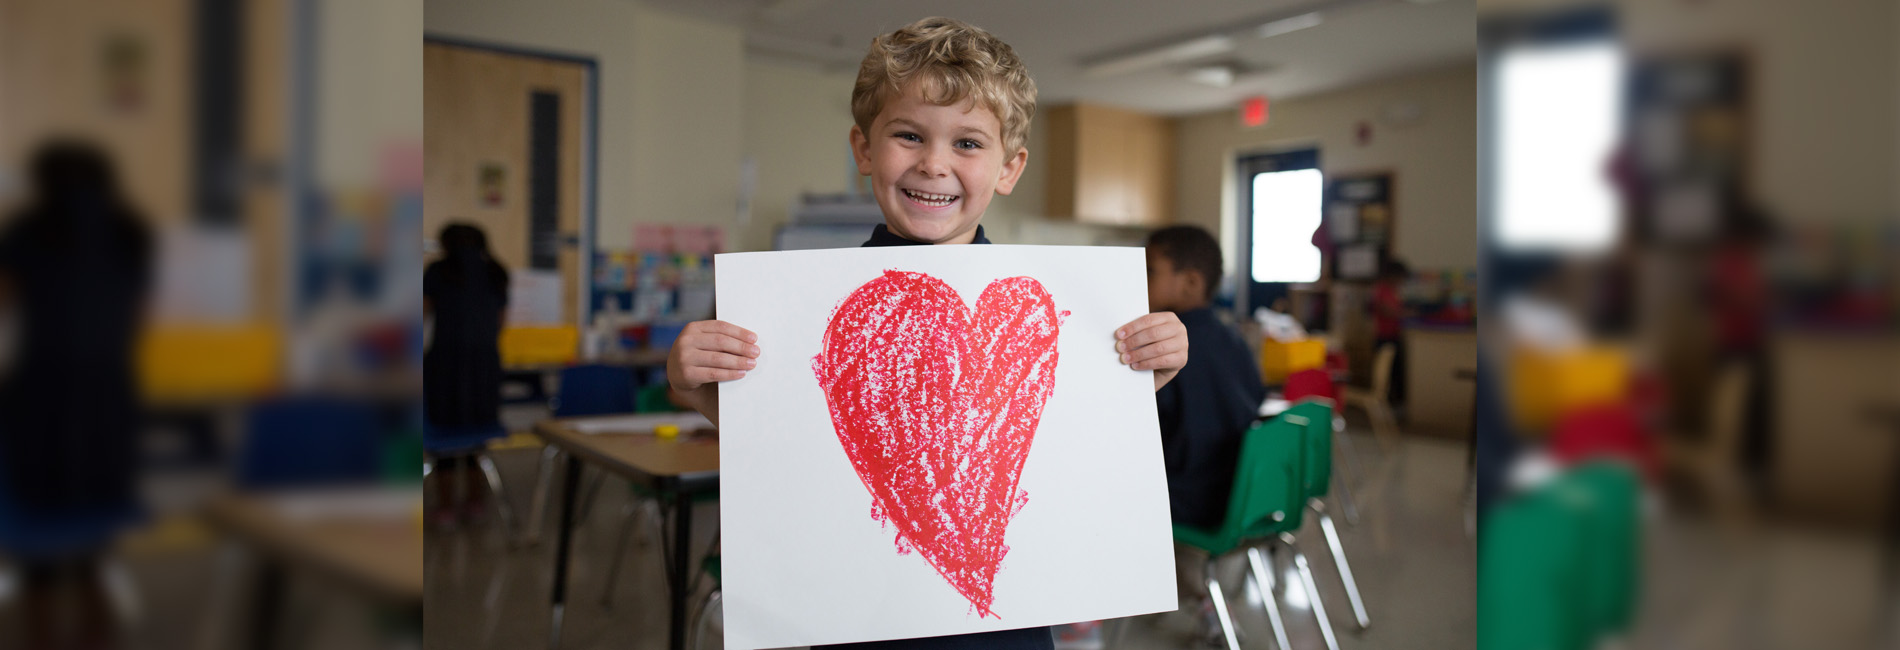 Boy holding up a drawing of a heart